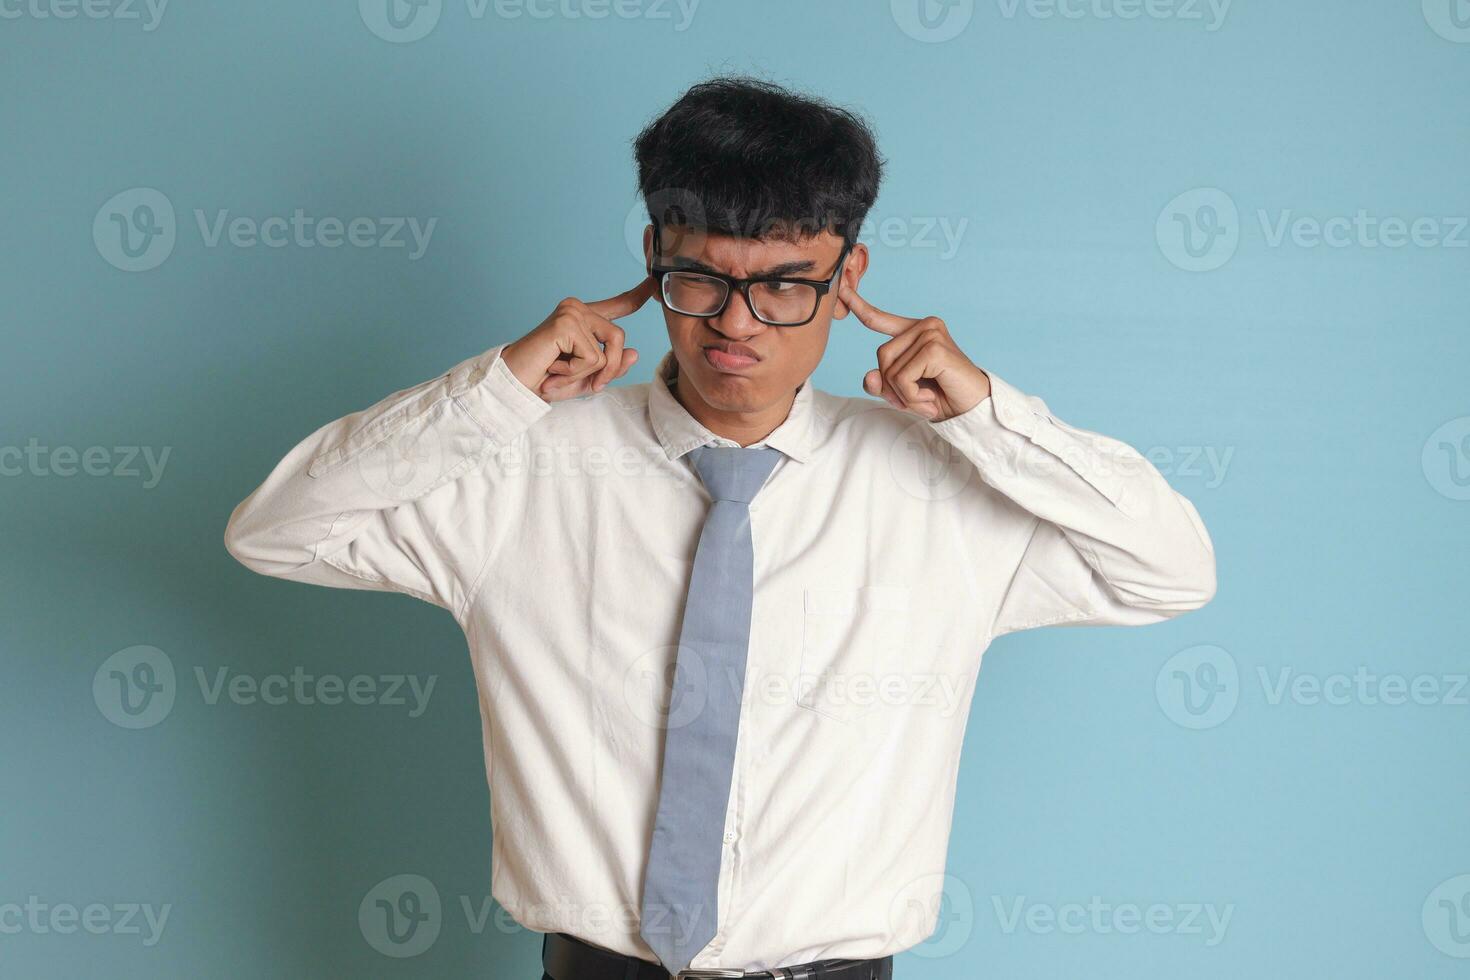 Indonesian senior high school student wearing white shirt uniform with gray tie covering his ears with his fingers, trying to avoid sounds or voices. Isolated image on blue background photo